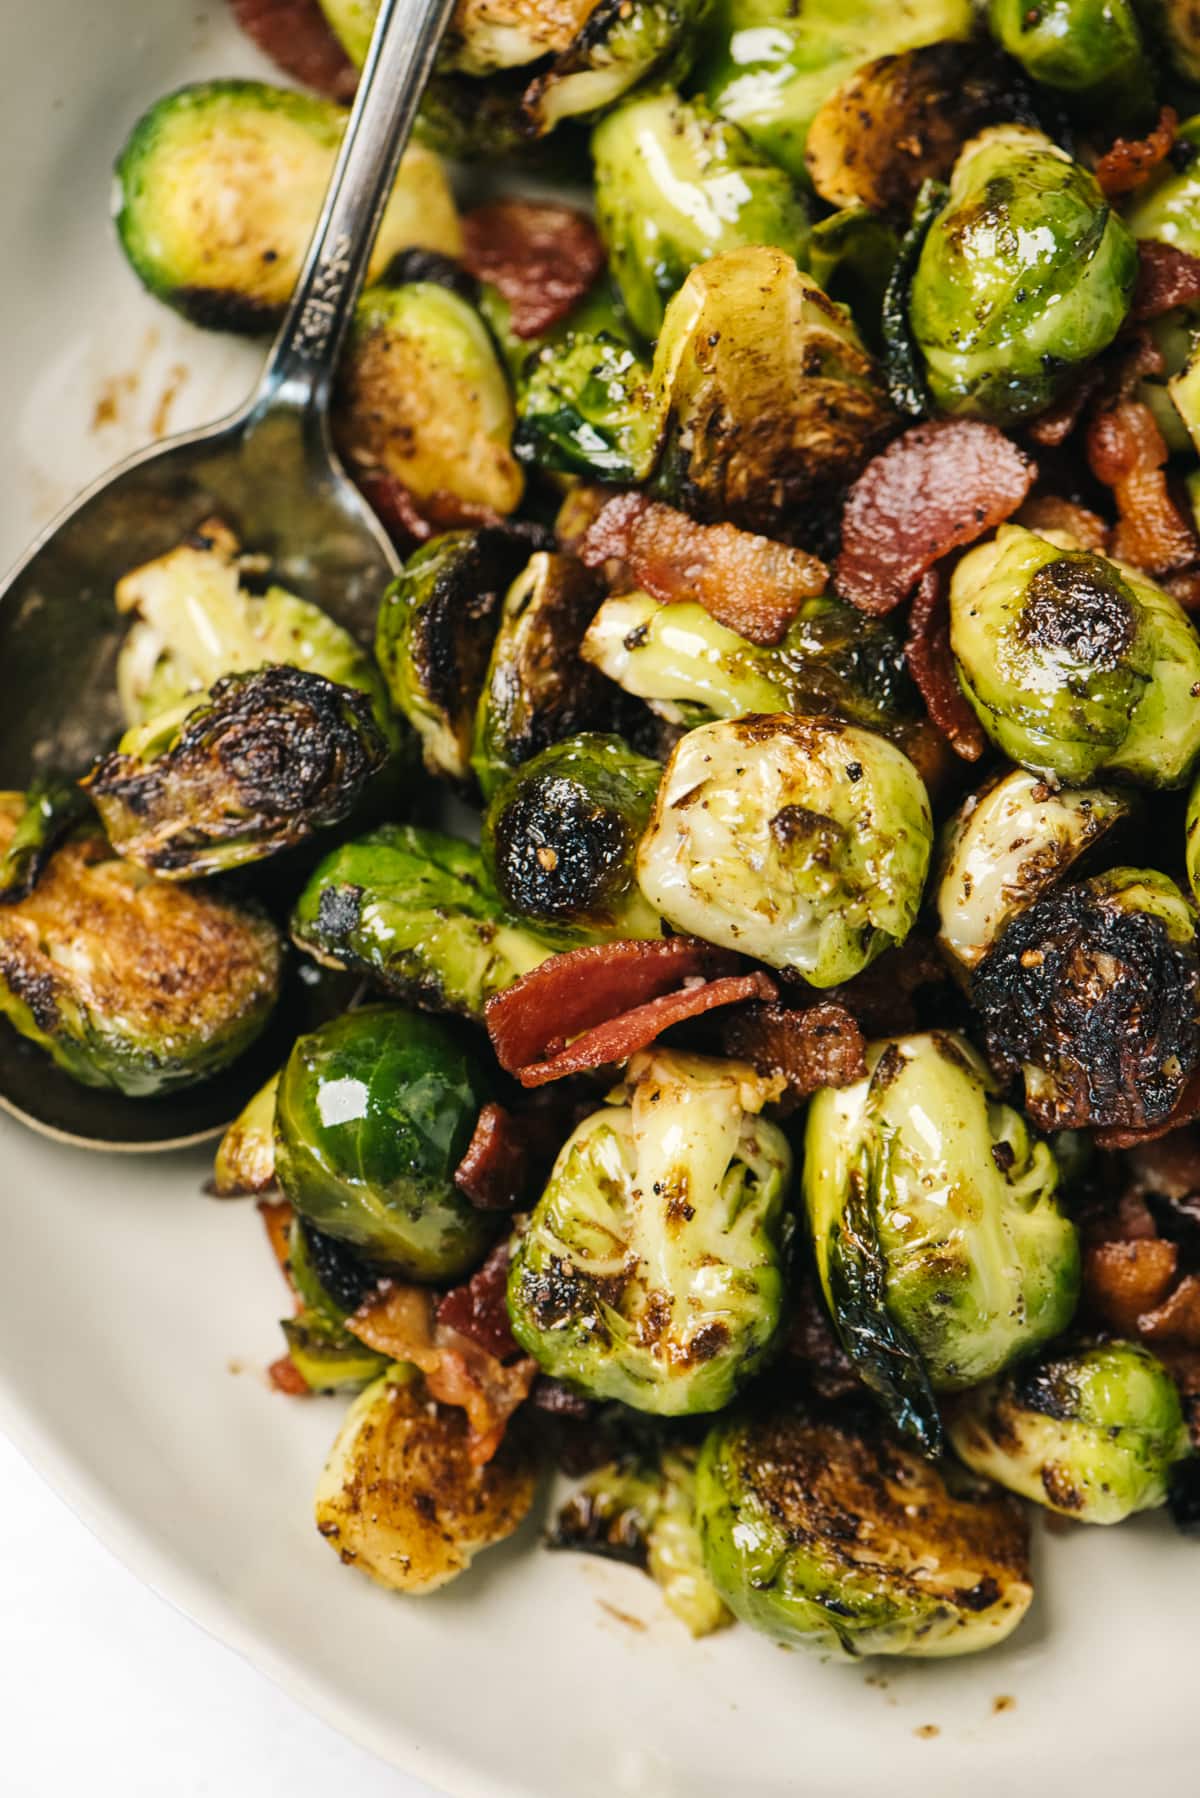 A spoon tucked into crispy sautéed Brussels sprouts with bacon in a low tan serving dish.